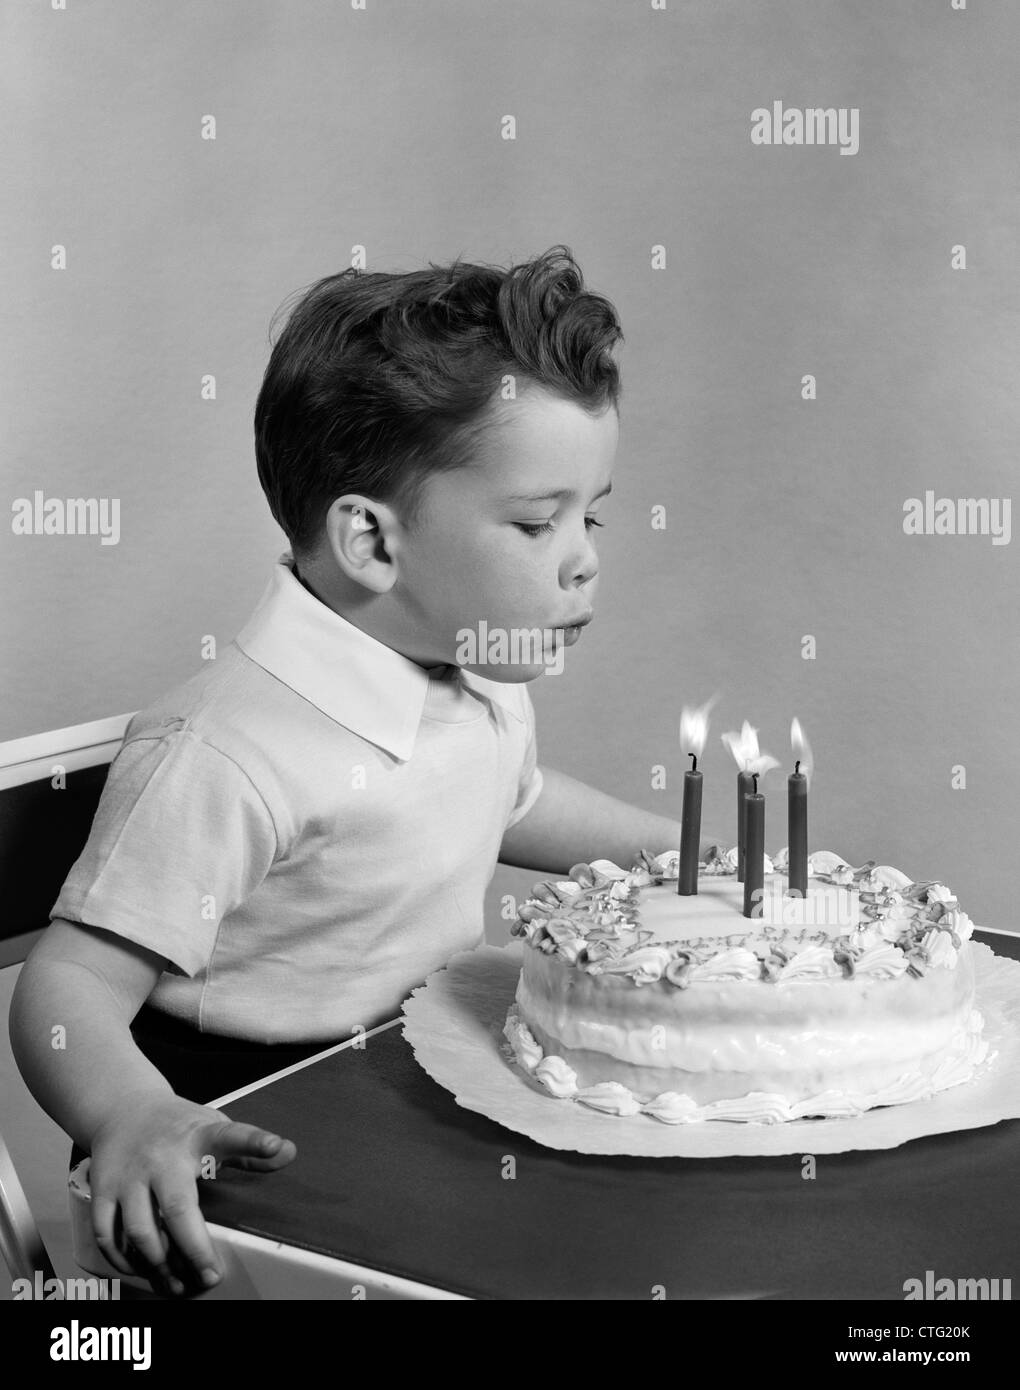 1950s BOY FOUR YEARS OLD BLOWING OUT CANDLES ON BIRTHDAY CAKE INDOOR Stock Photo